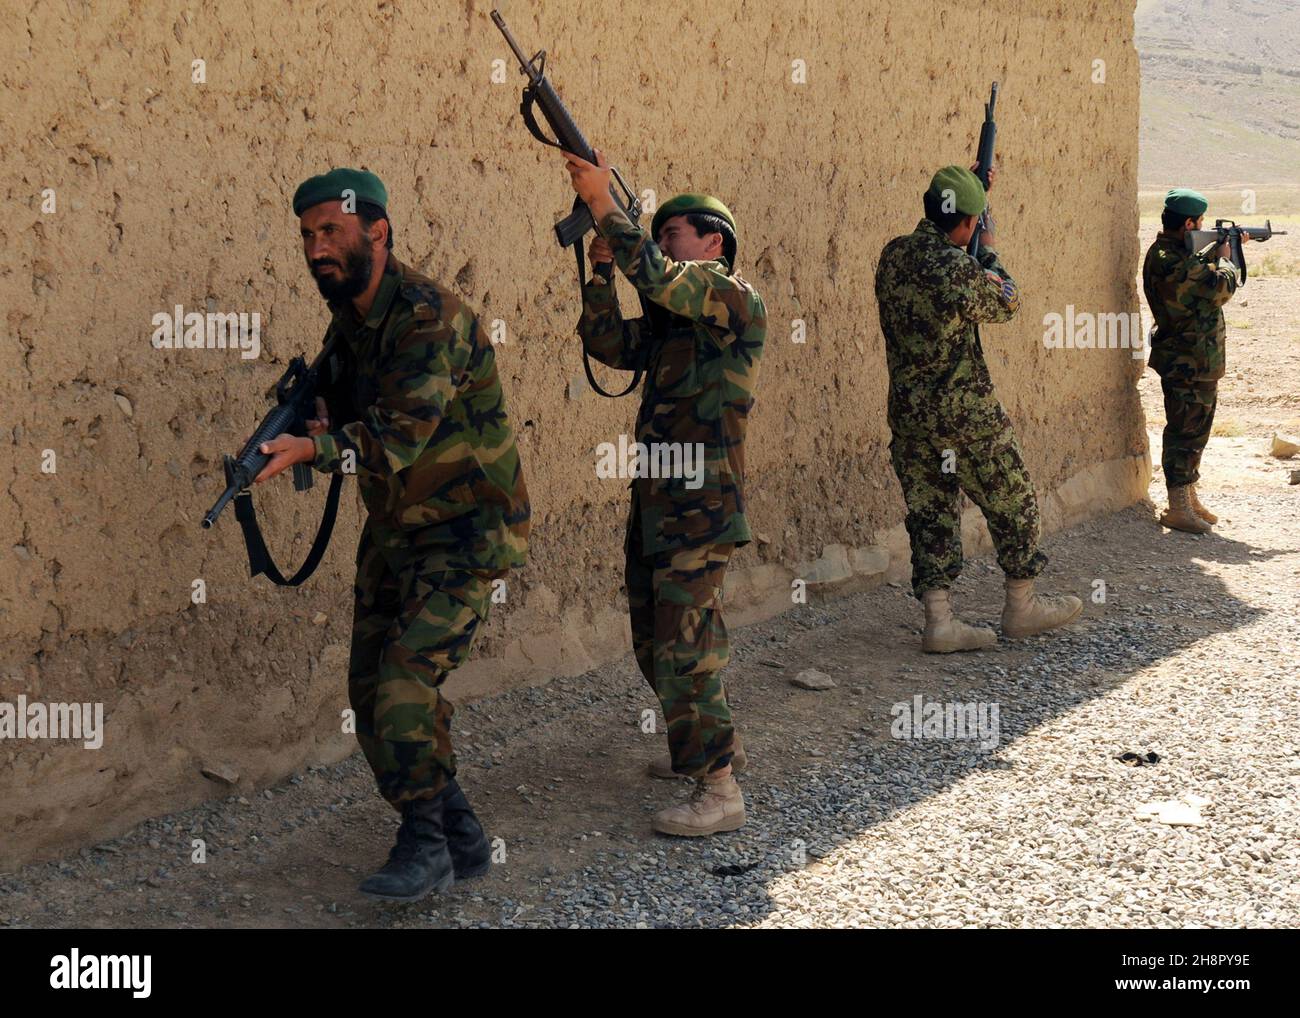 Afghan National Army soldiers during combat training at Forward Operating Base Thunder August 22, 2010 in Paktia province, Afghanistan. Stock Photo